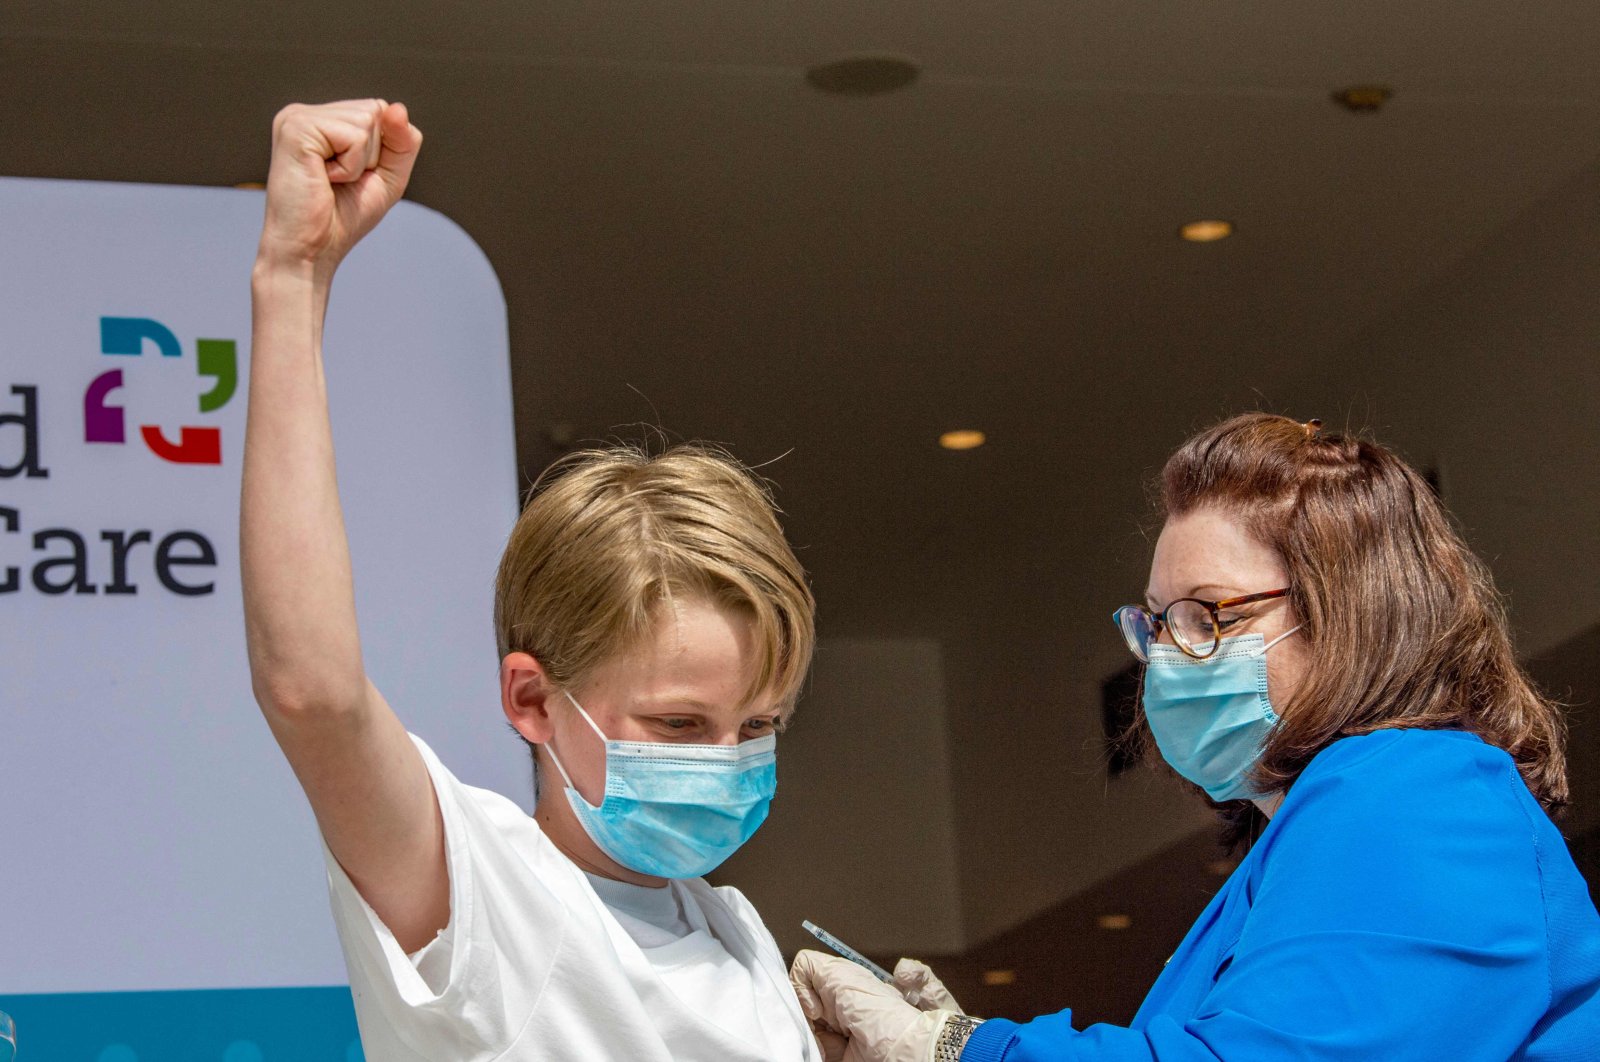 Charles Muro,13, celebrates being inoculated by Nurse Karen Pagliaro at Hartford Healthcare’s mass vaccination center at the Connecticut Convention Center in Hartford, Connecticut, U.S., on May 13, 2021. (AFP Photo)